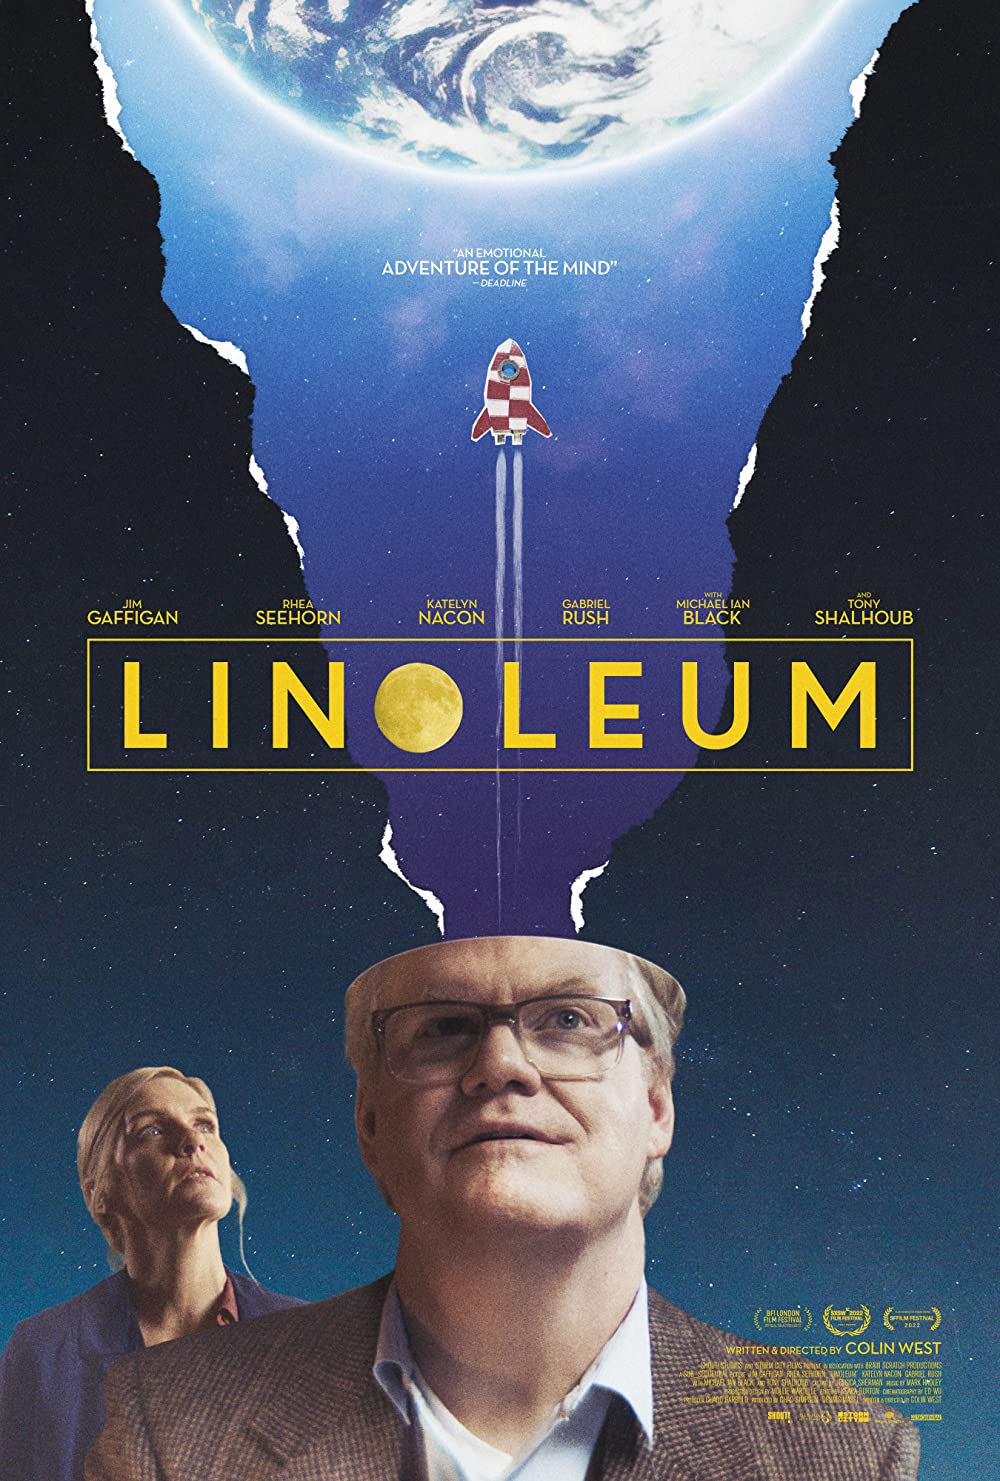 Linoleum Movie (2022) Cast, Release Date, Story, Budget, Collection, Poster, Trailer, Review